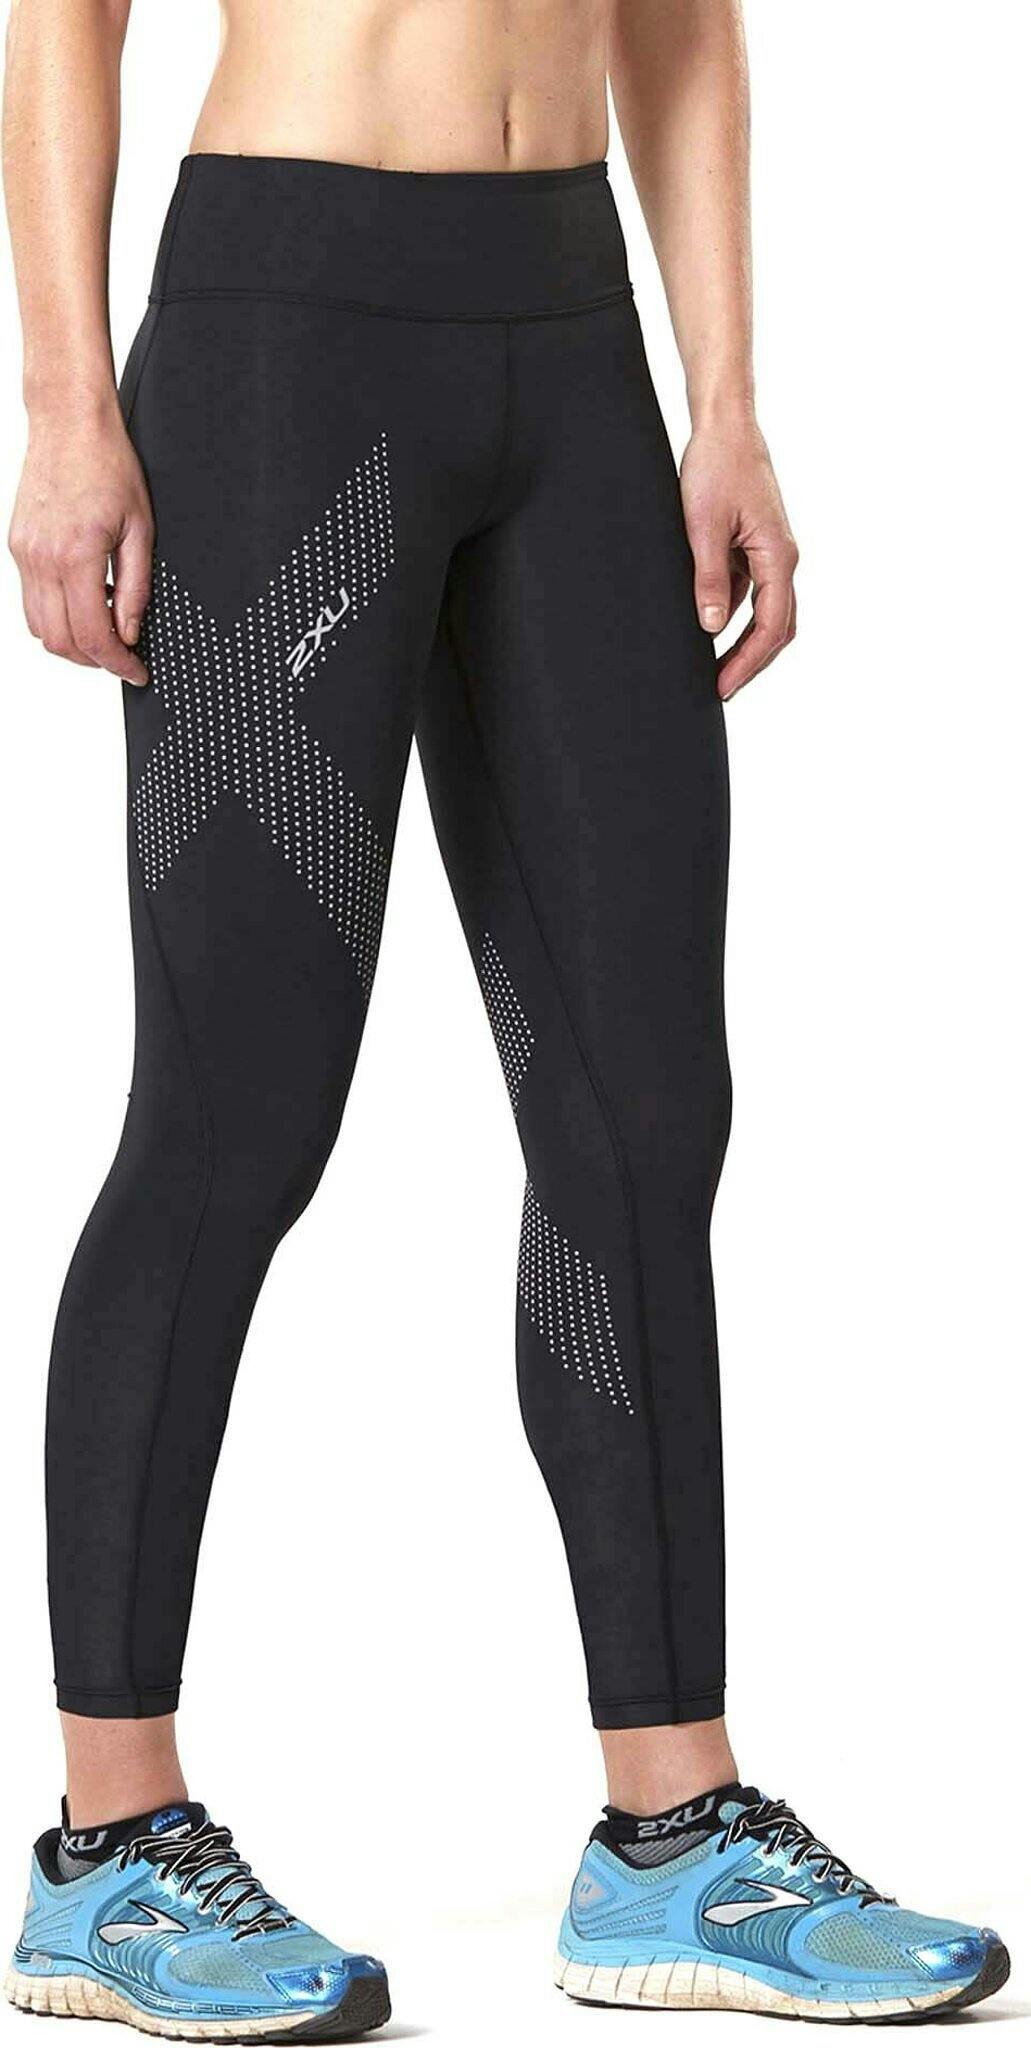 Product image for Mid-Rise Compression Tights - Women's